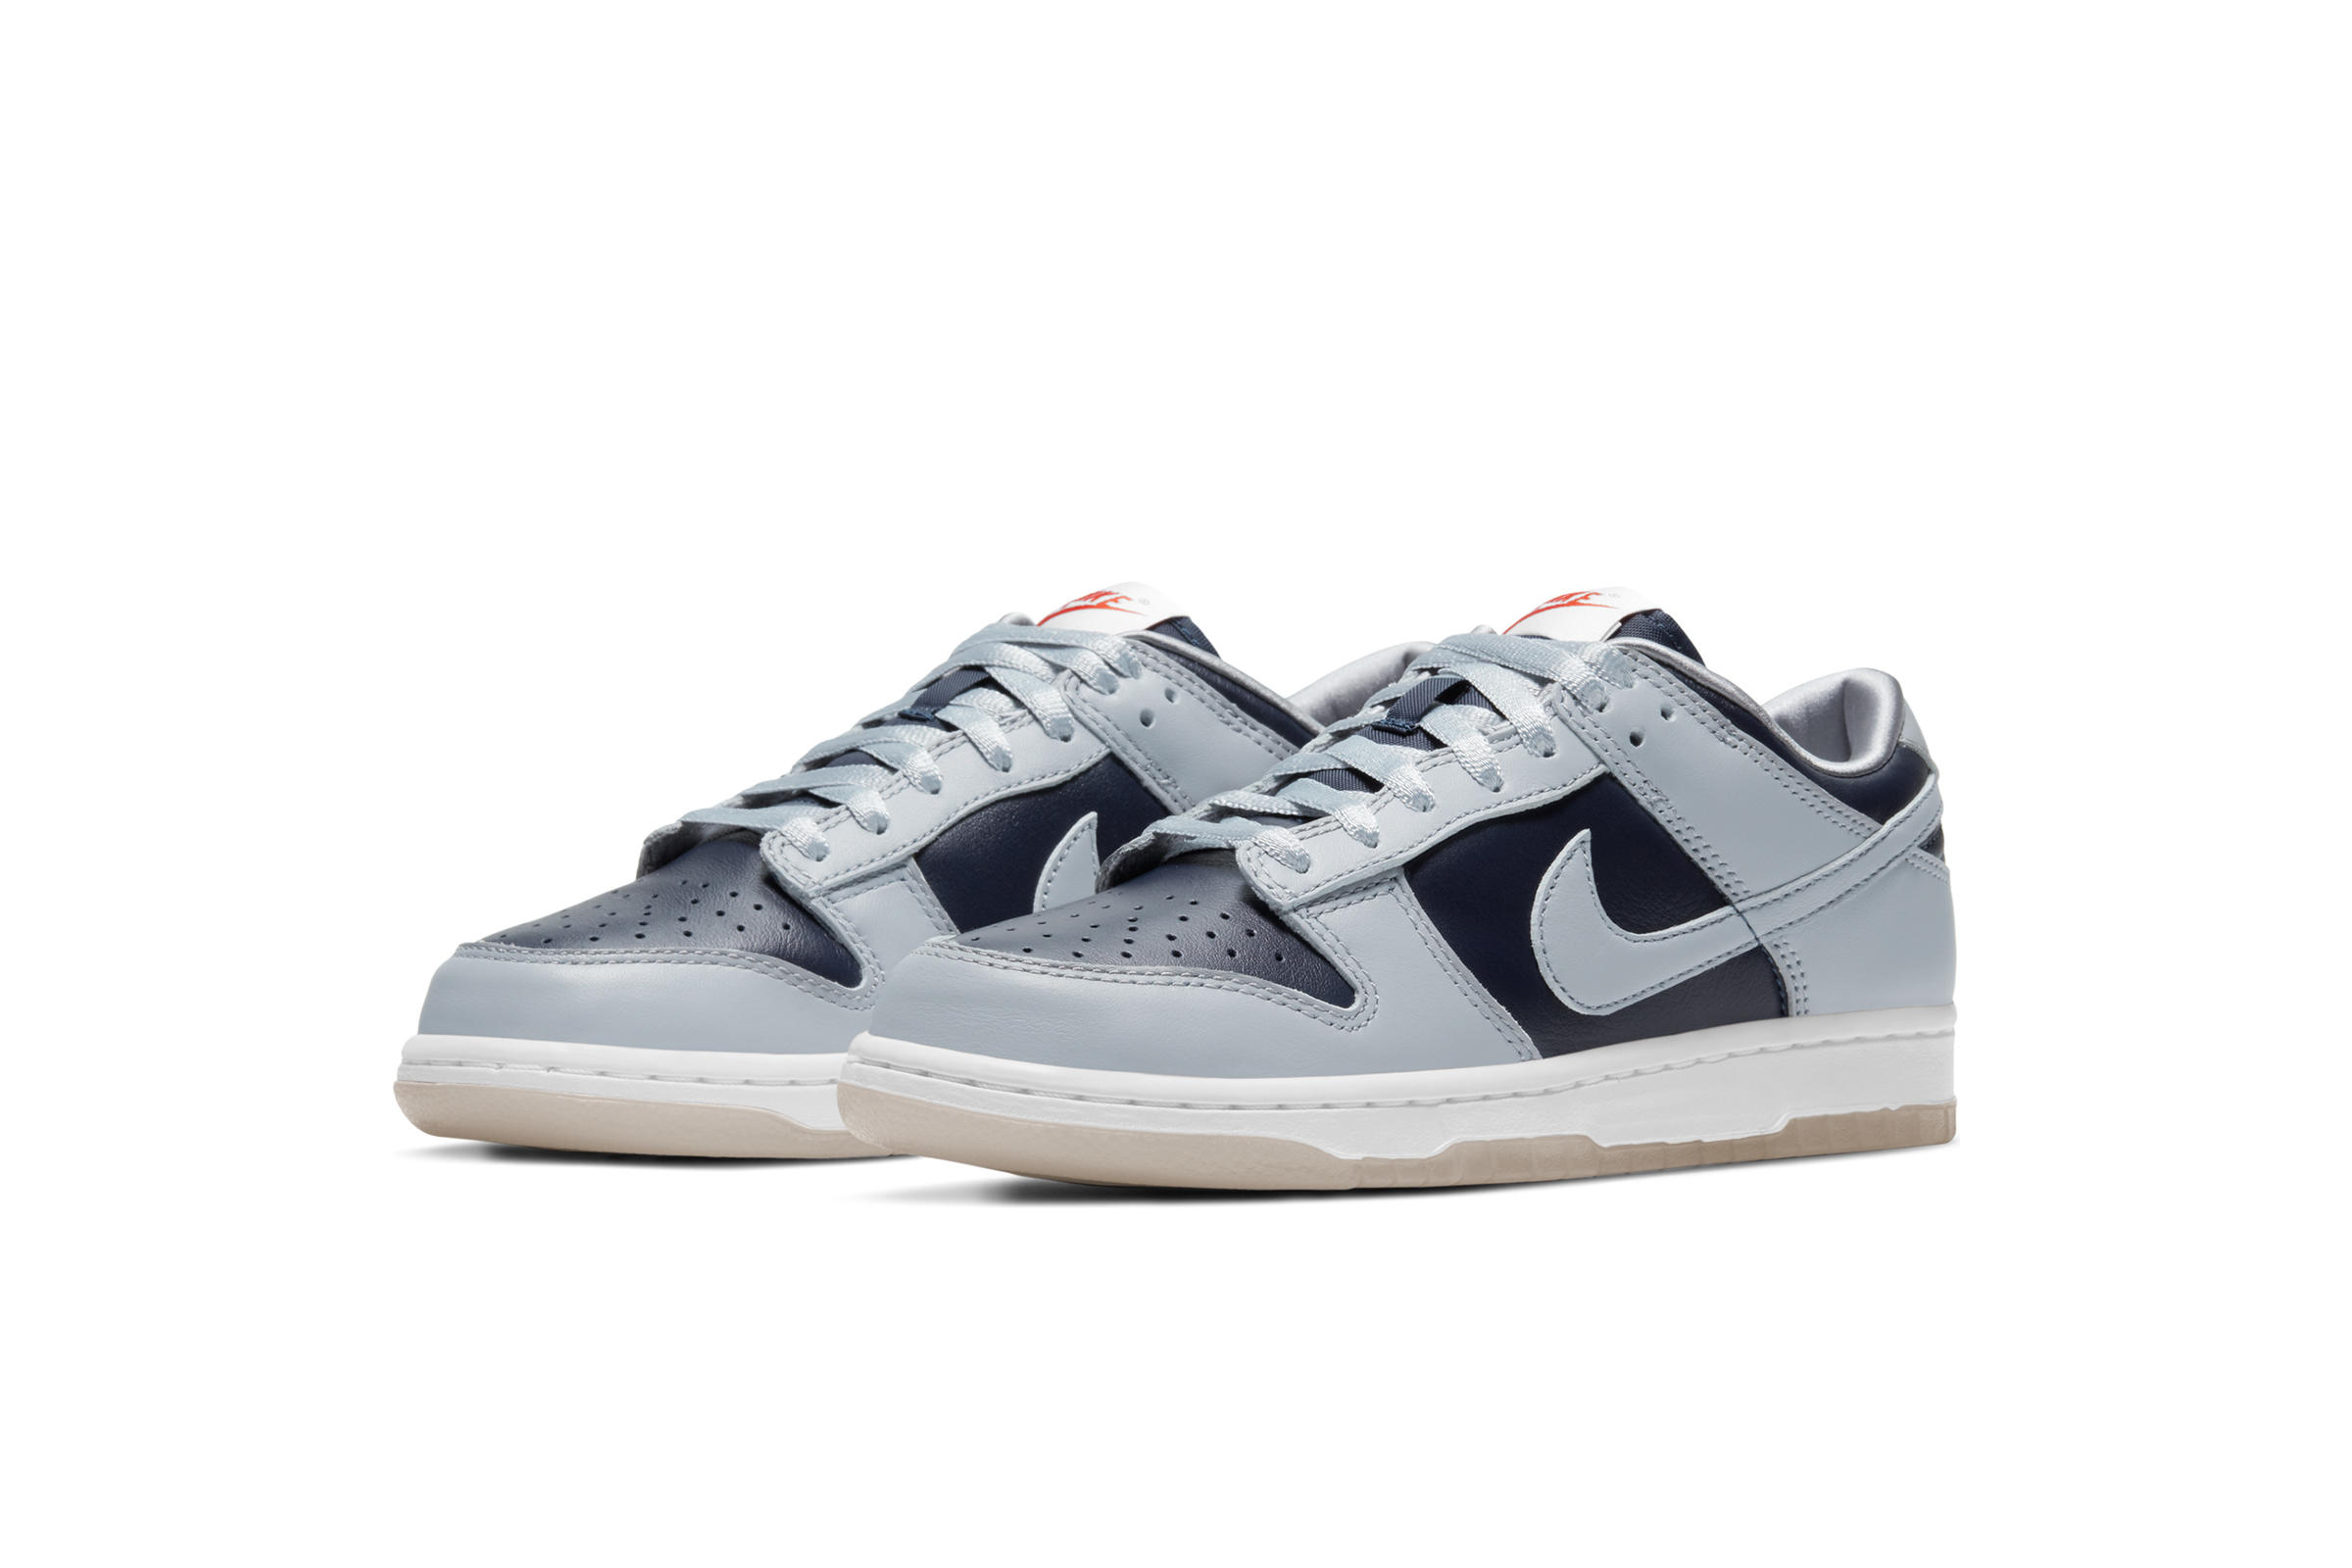 Nike WMNS DUNK LOW SP "WOLF GREY"